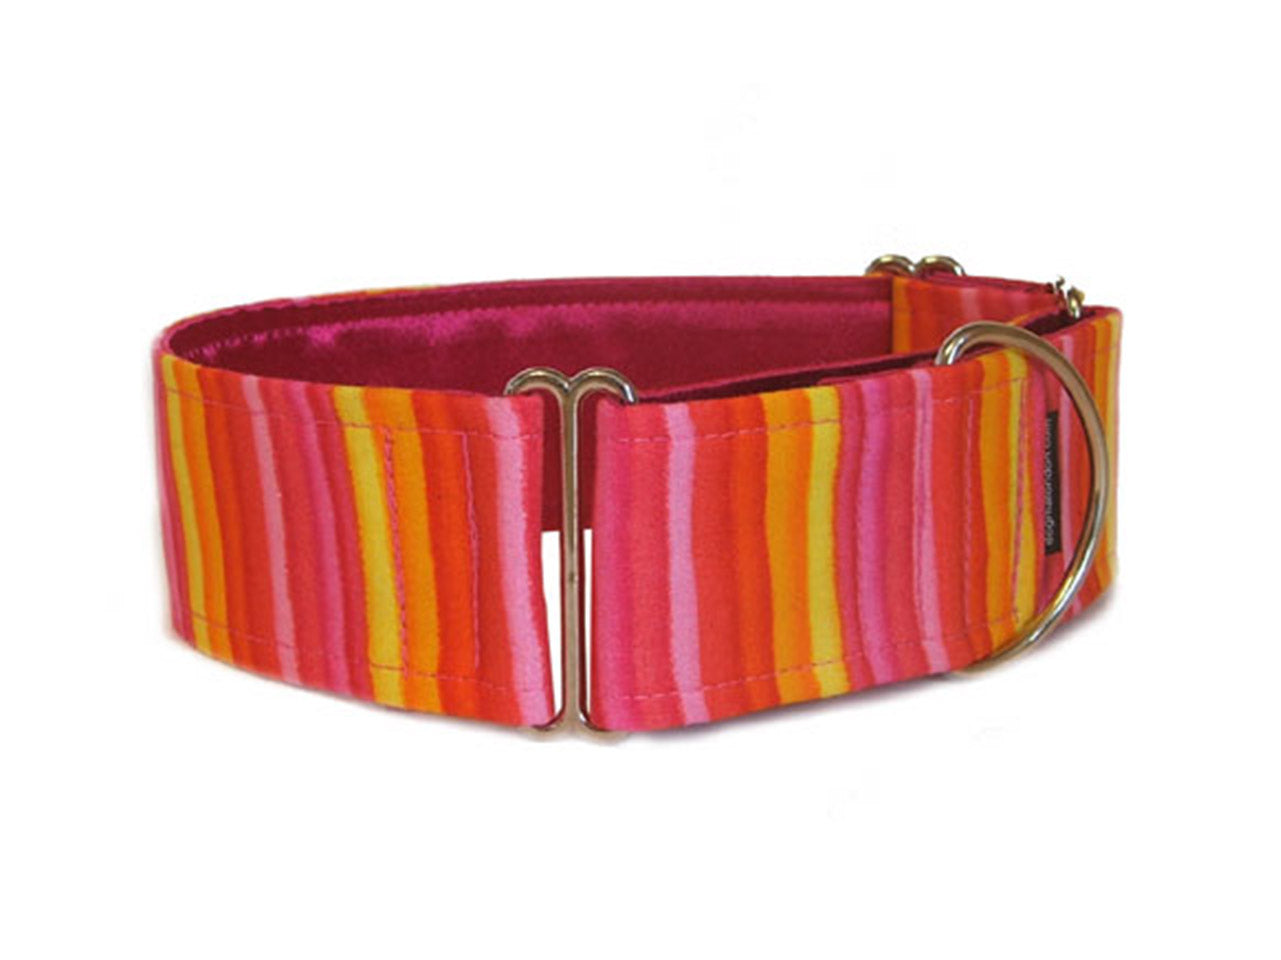 Bright sunny stripes in shades of pink and yellow will have your pooch ready for a day at the beach or pool! 